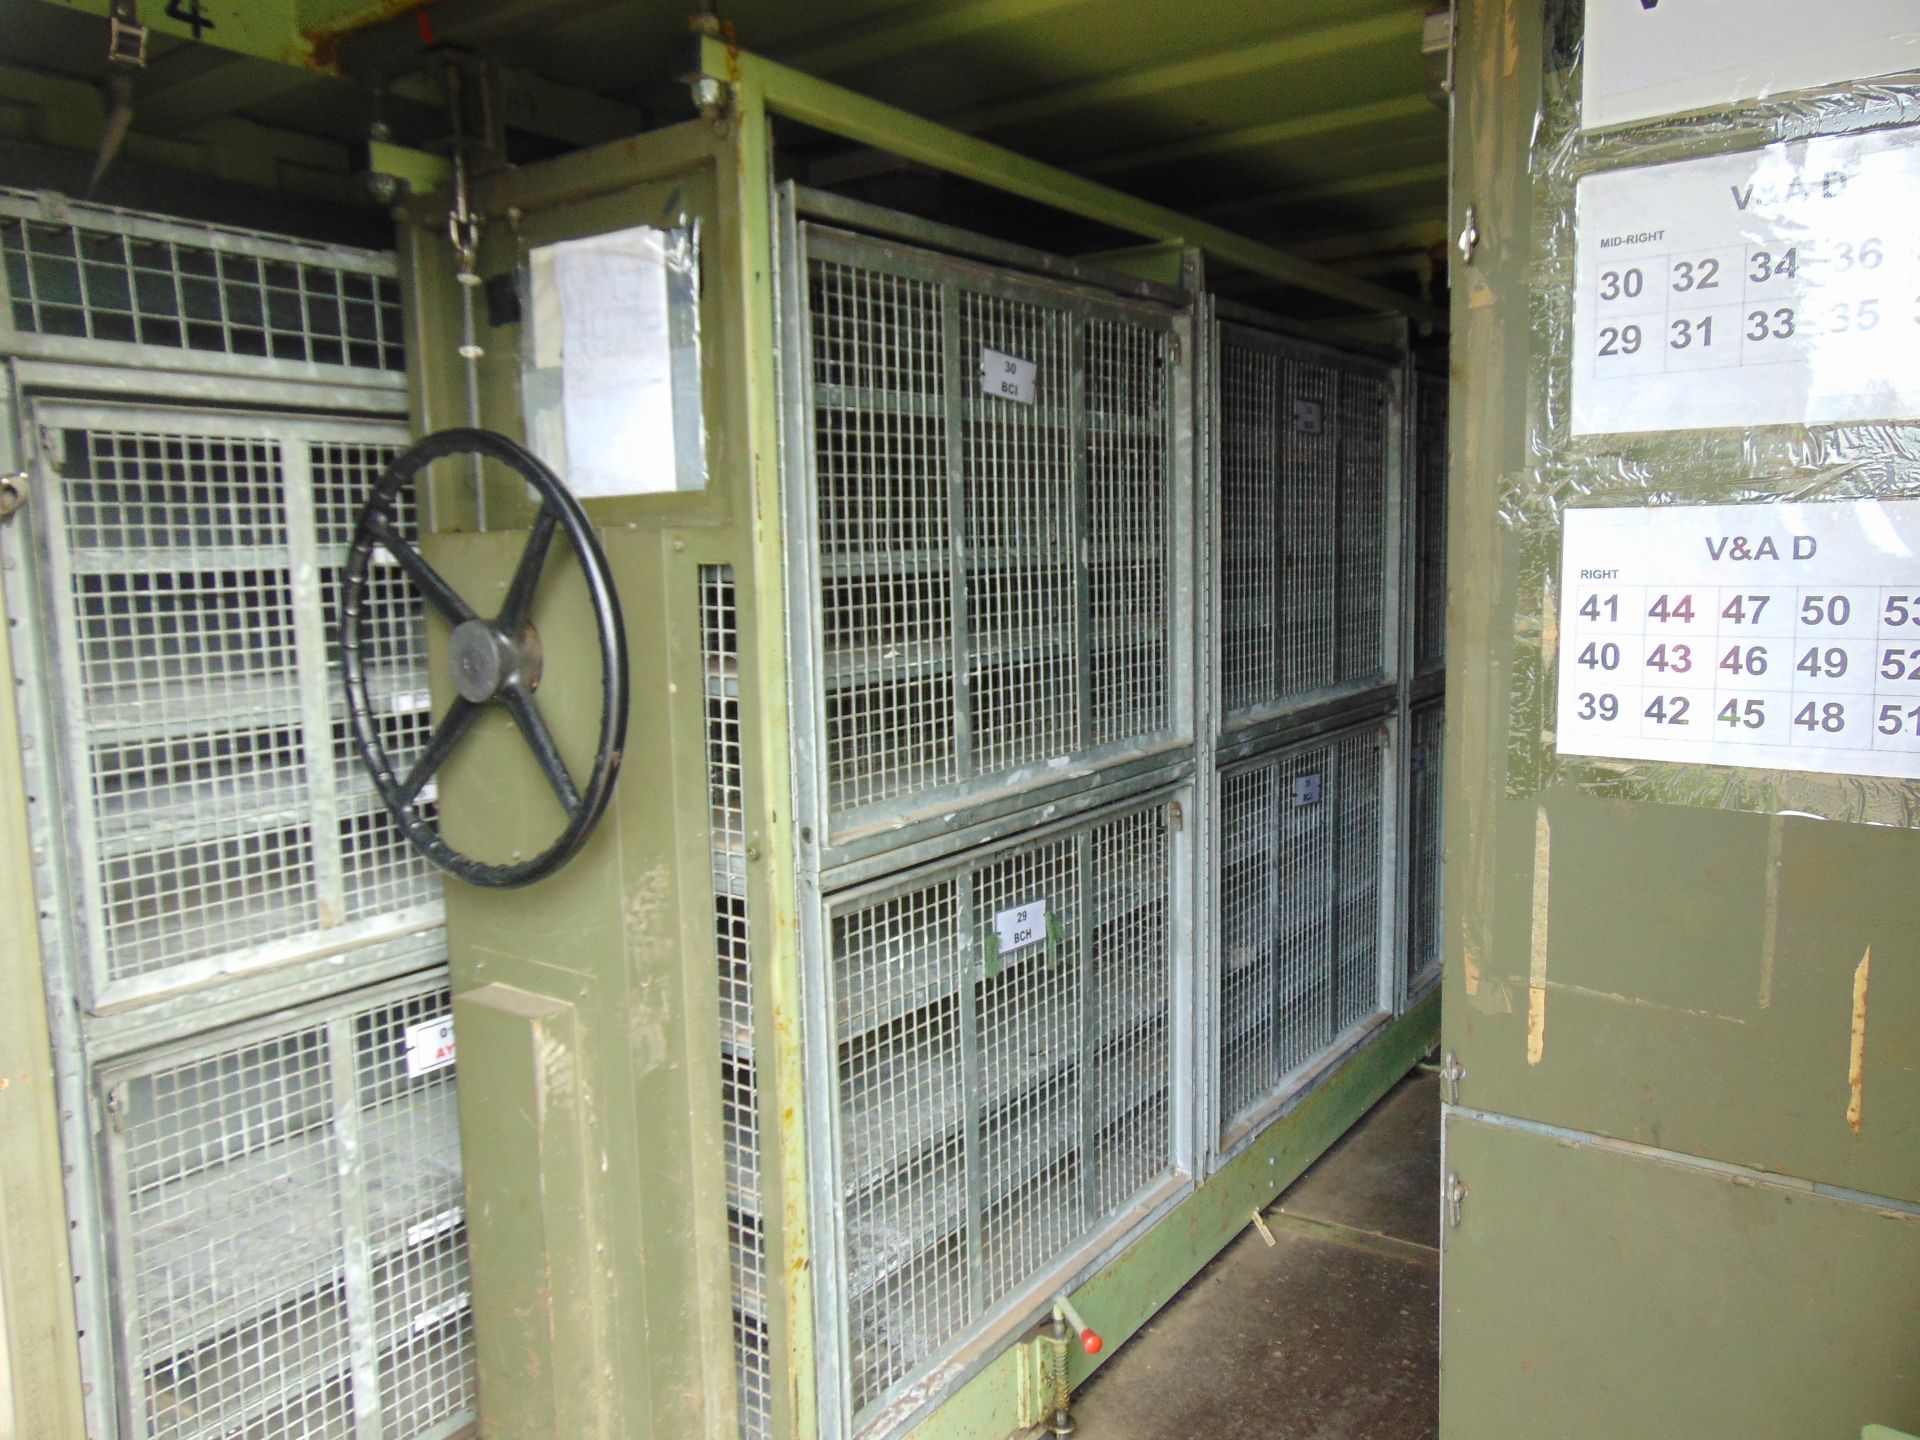 20ft ISO Shipping Container Complete with Fitted Internal Roller Racking Storage System - Image 6 of 8